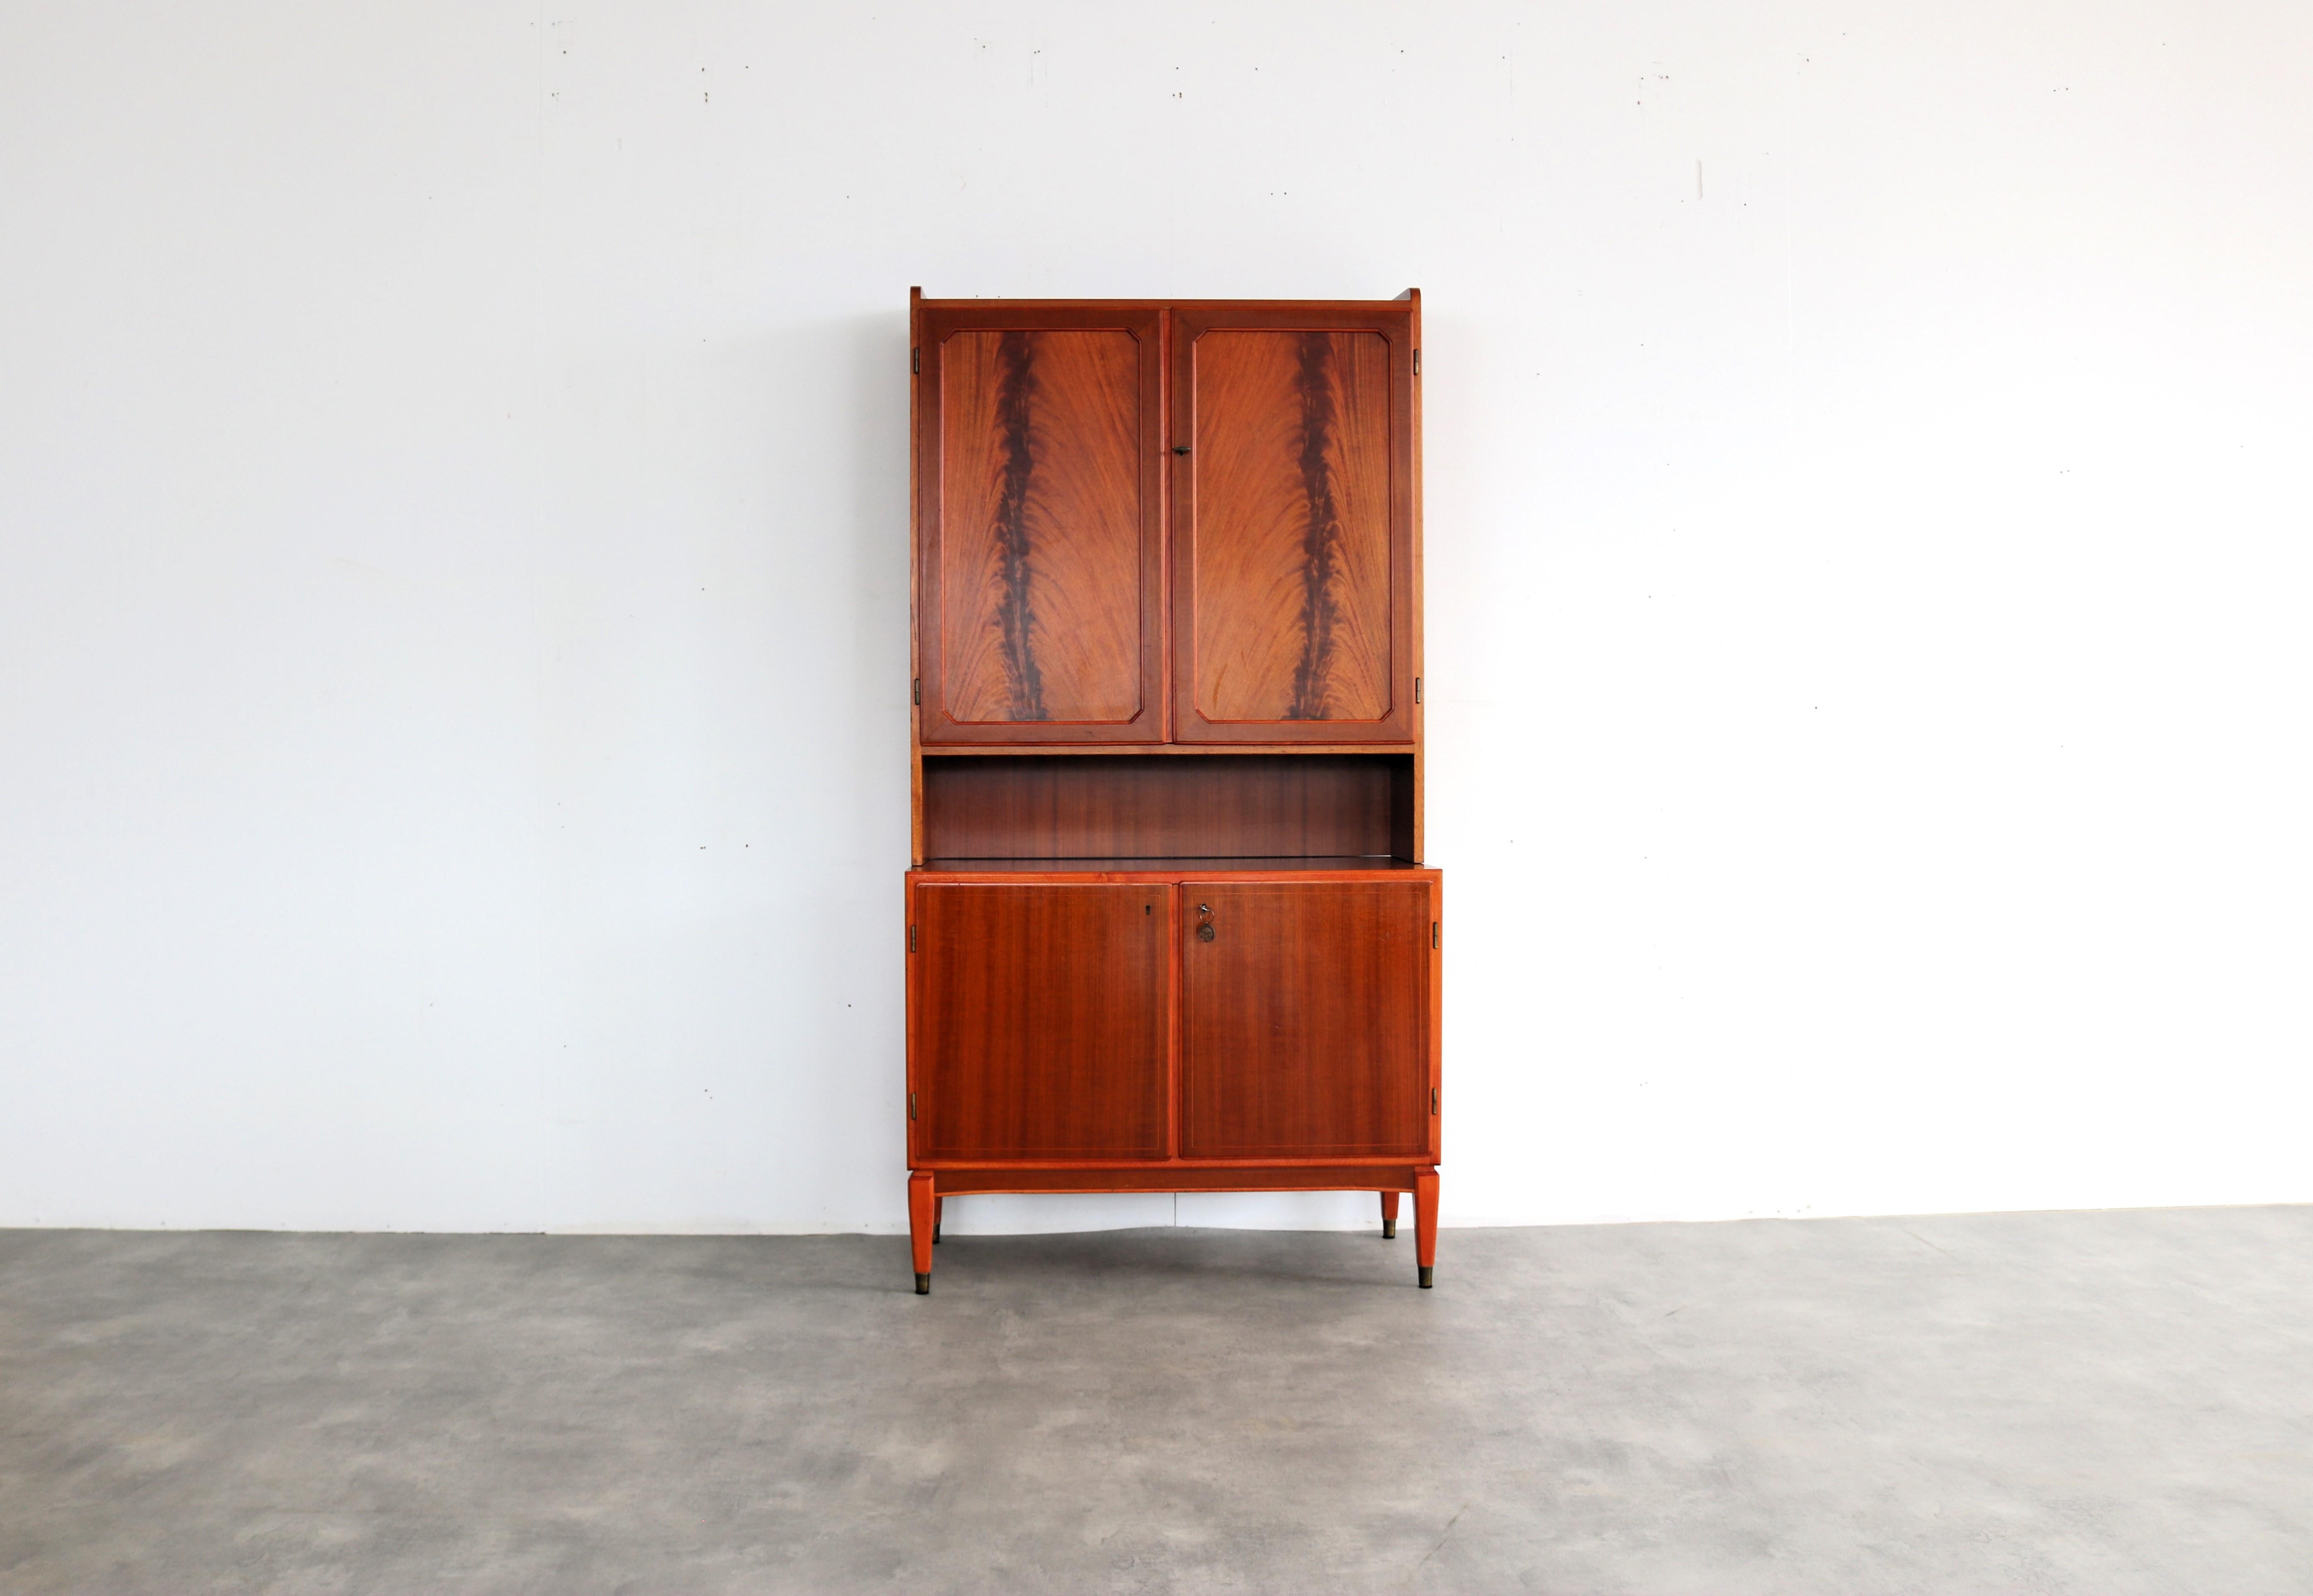 vintage sideboard | wall cupboard | 60s | Sweden

period | 60's
design | unknown | Sweden
condition | good | light signs of use
size | 174 x 90 x 42 (hxwxd)

details | mahogany;

article number | 2131